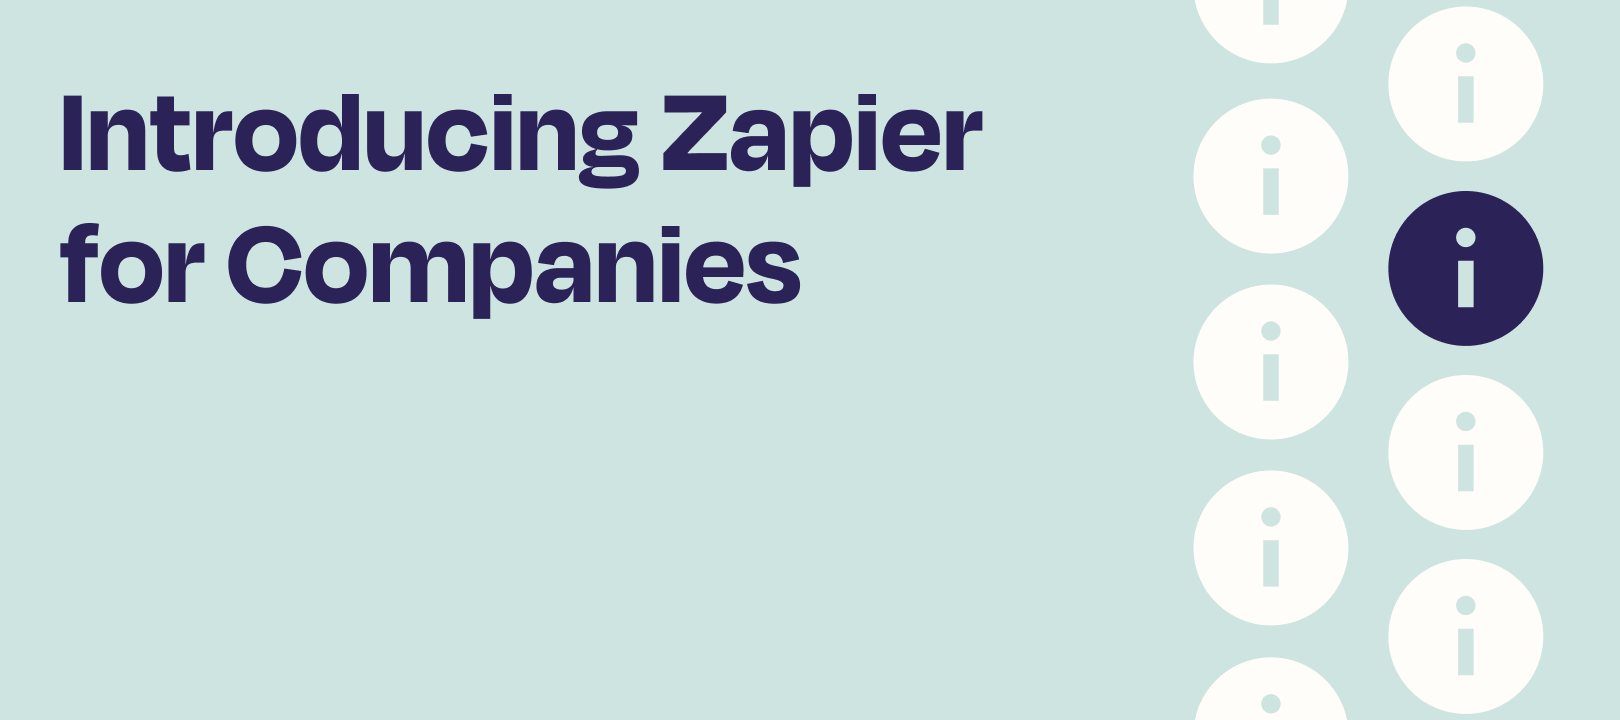 Introducing Zapier for Companies